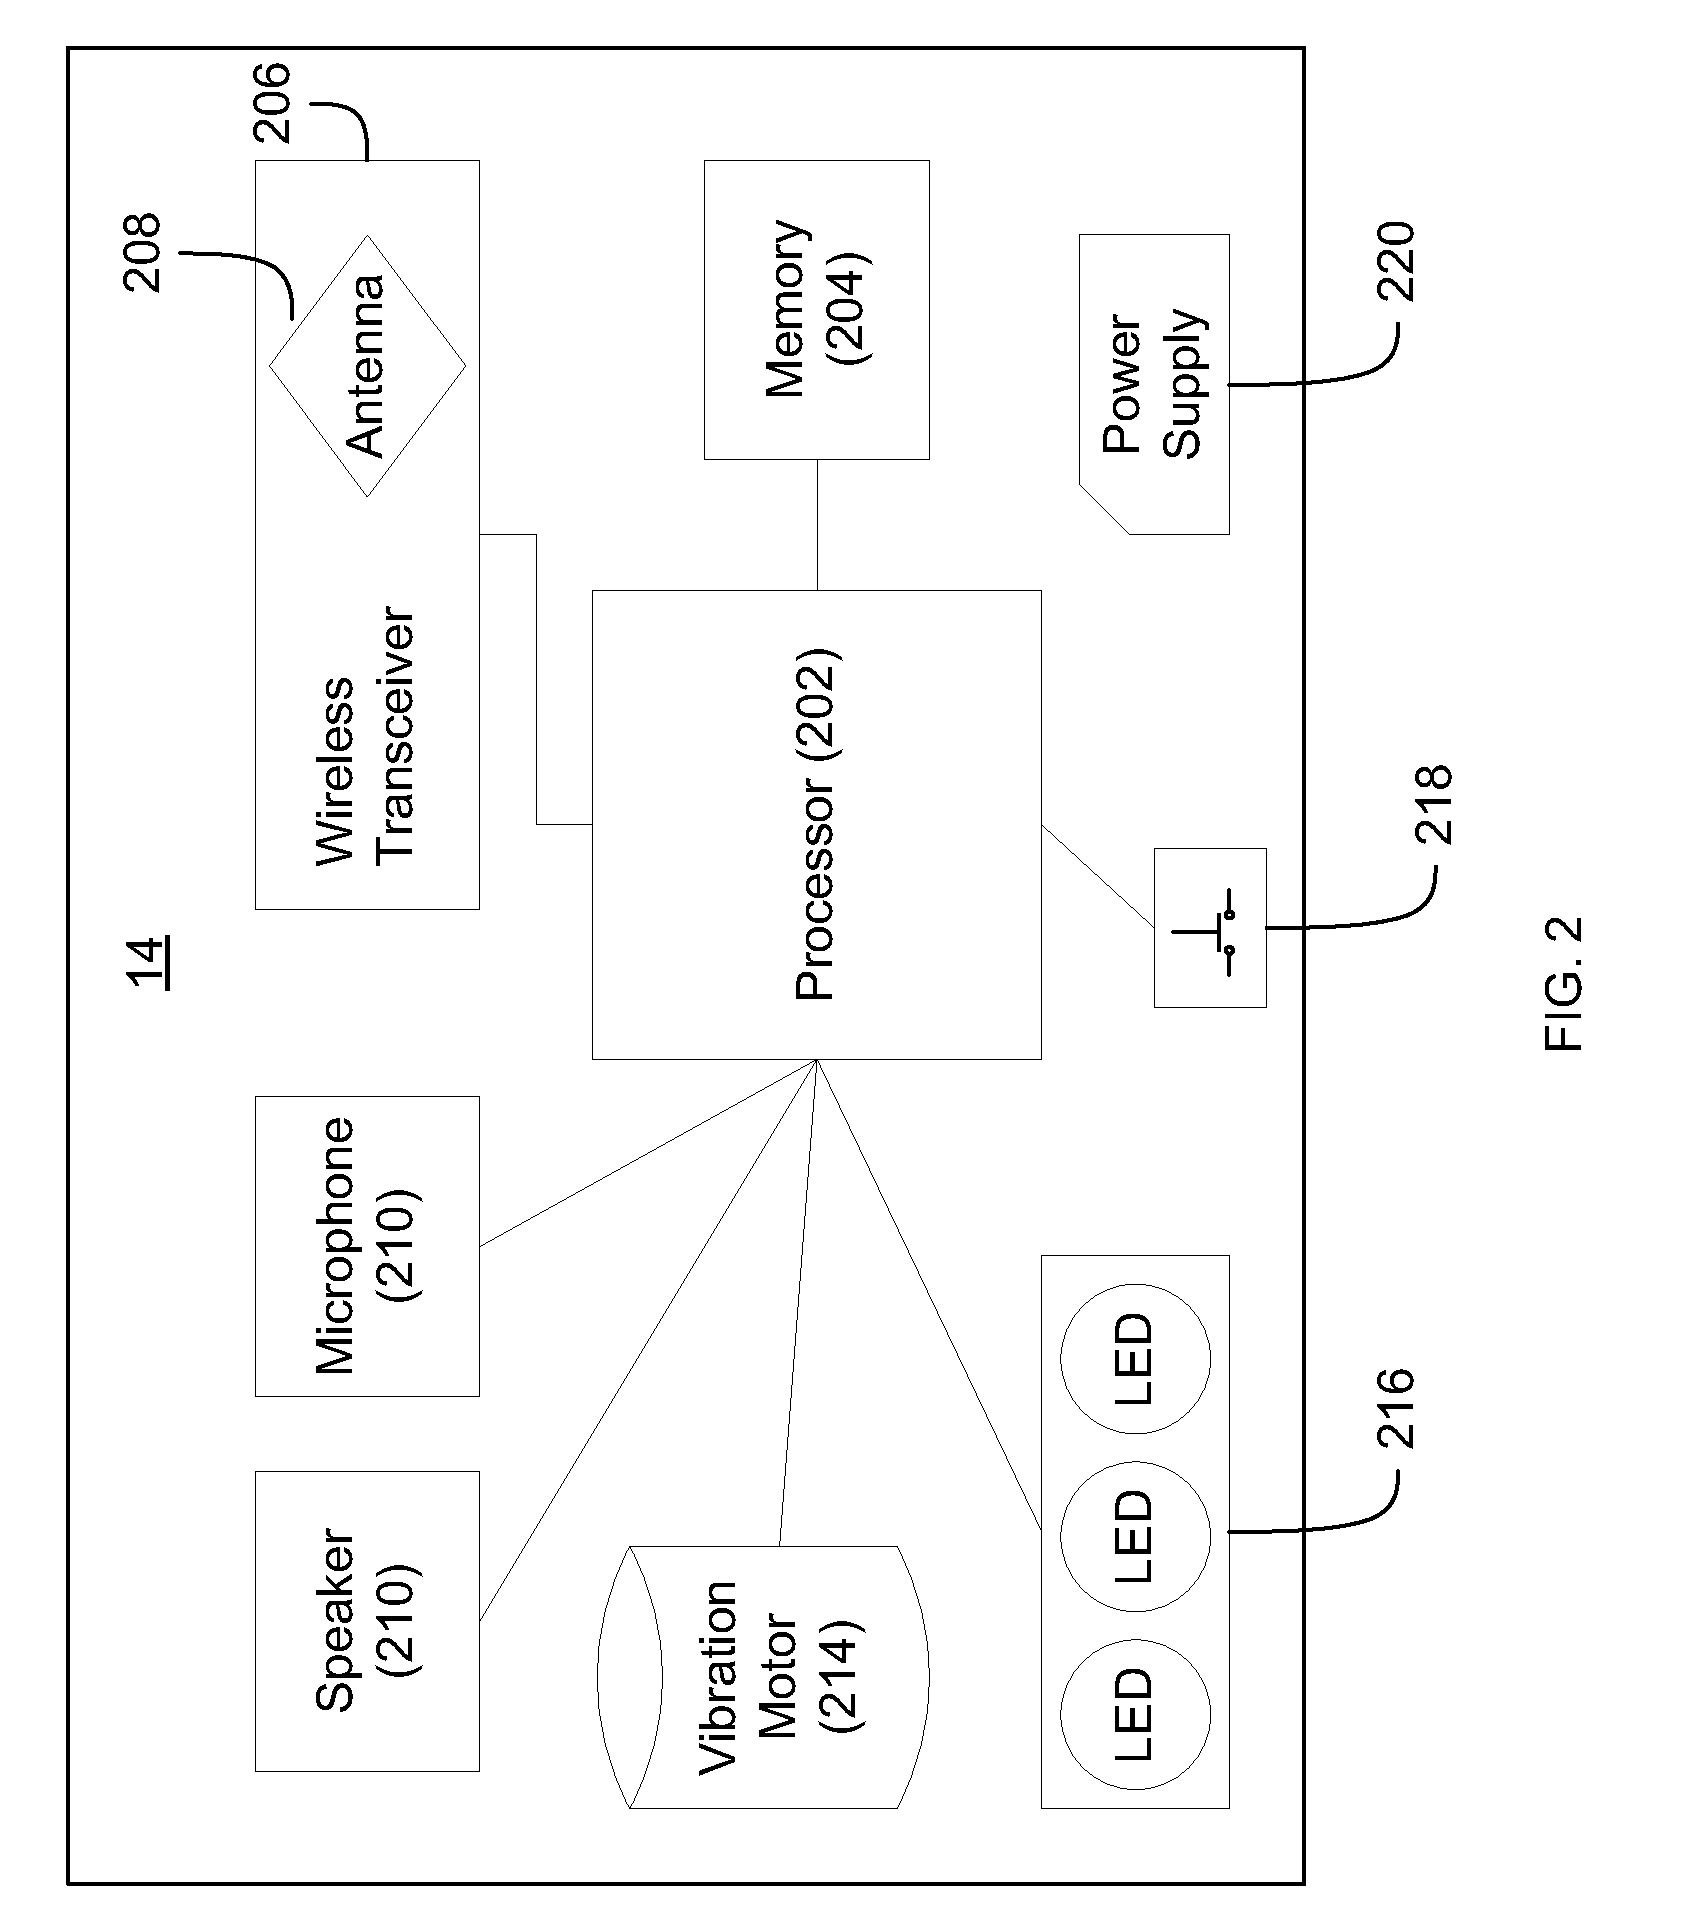 Wireless security device and method